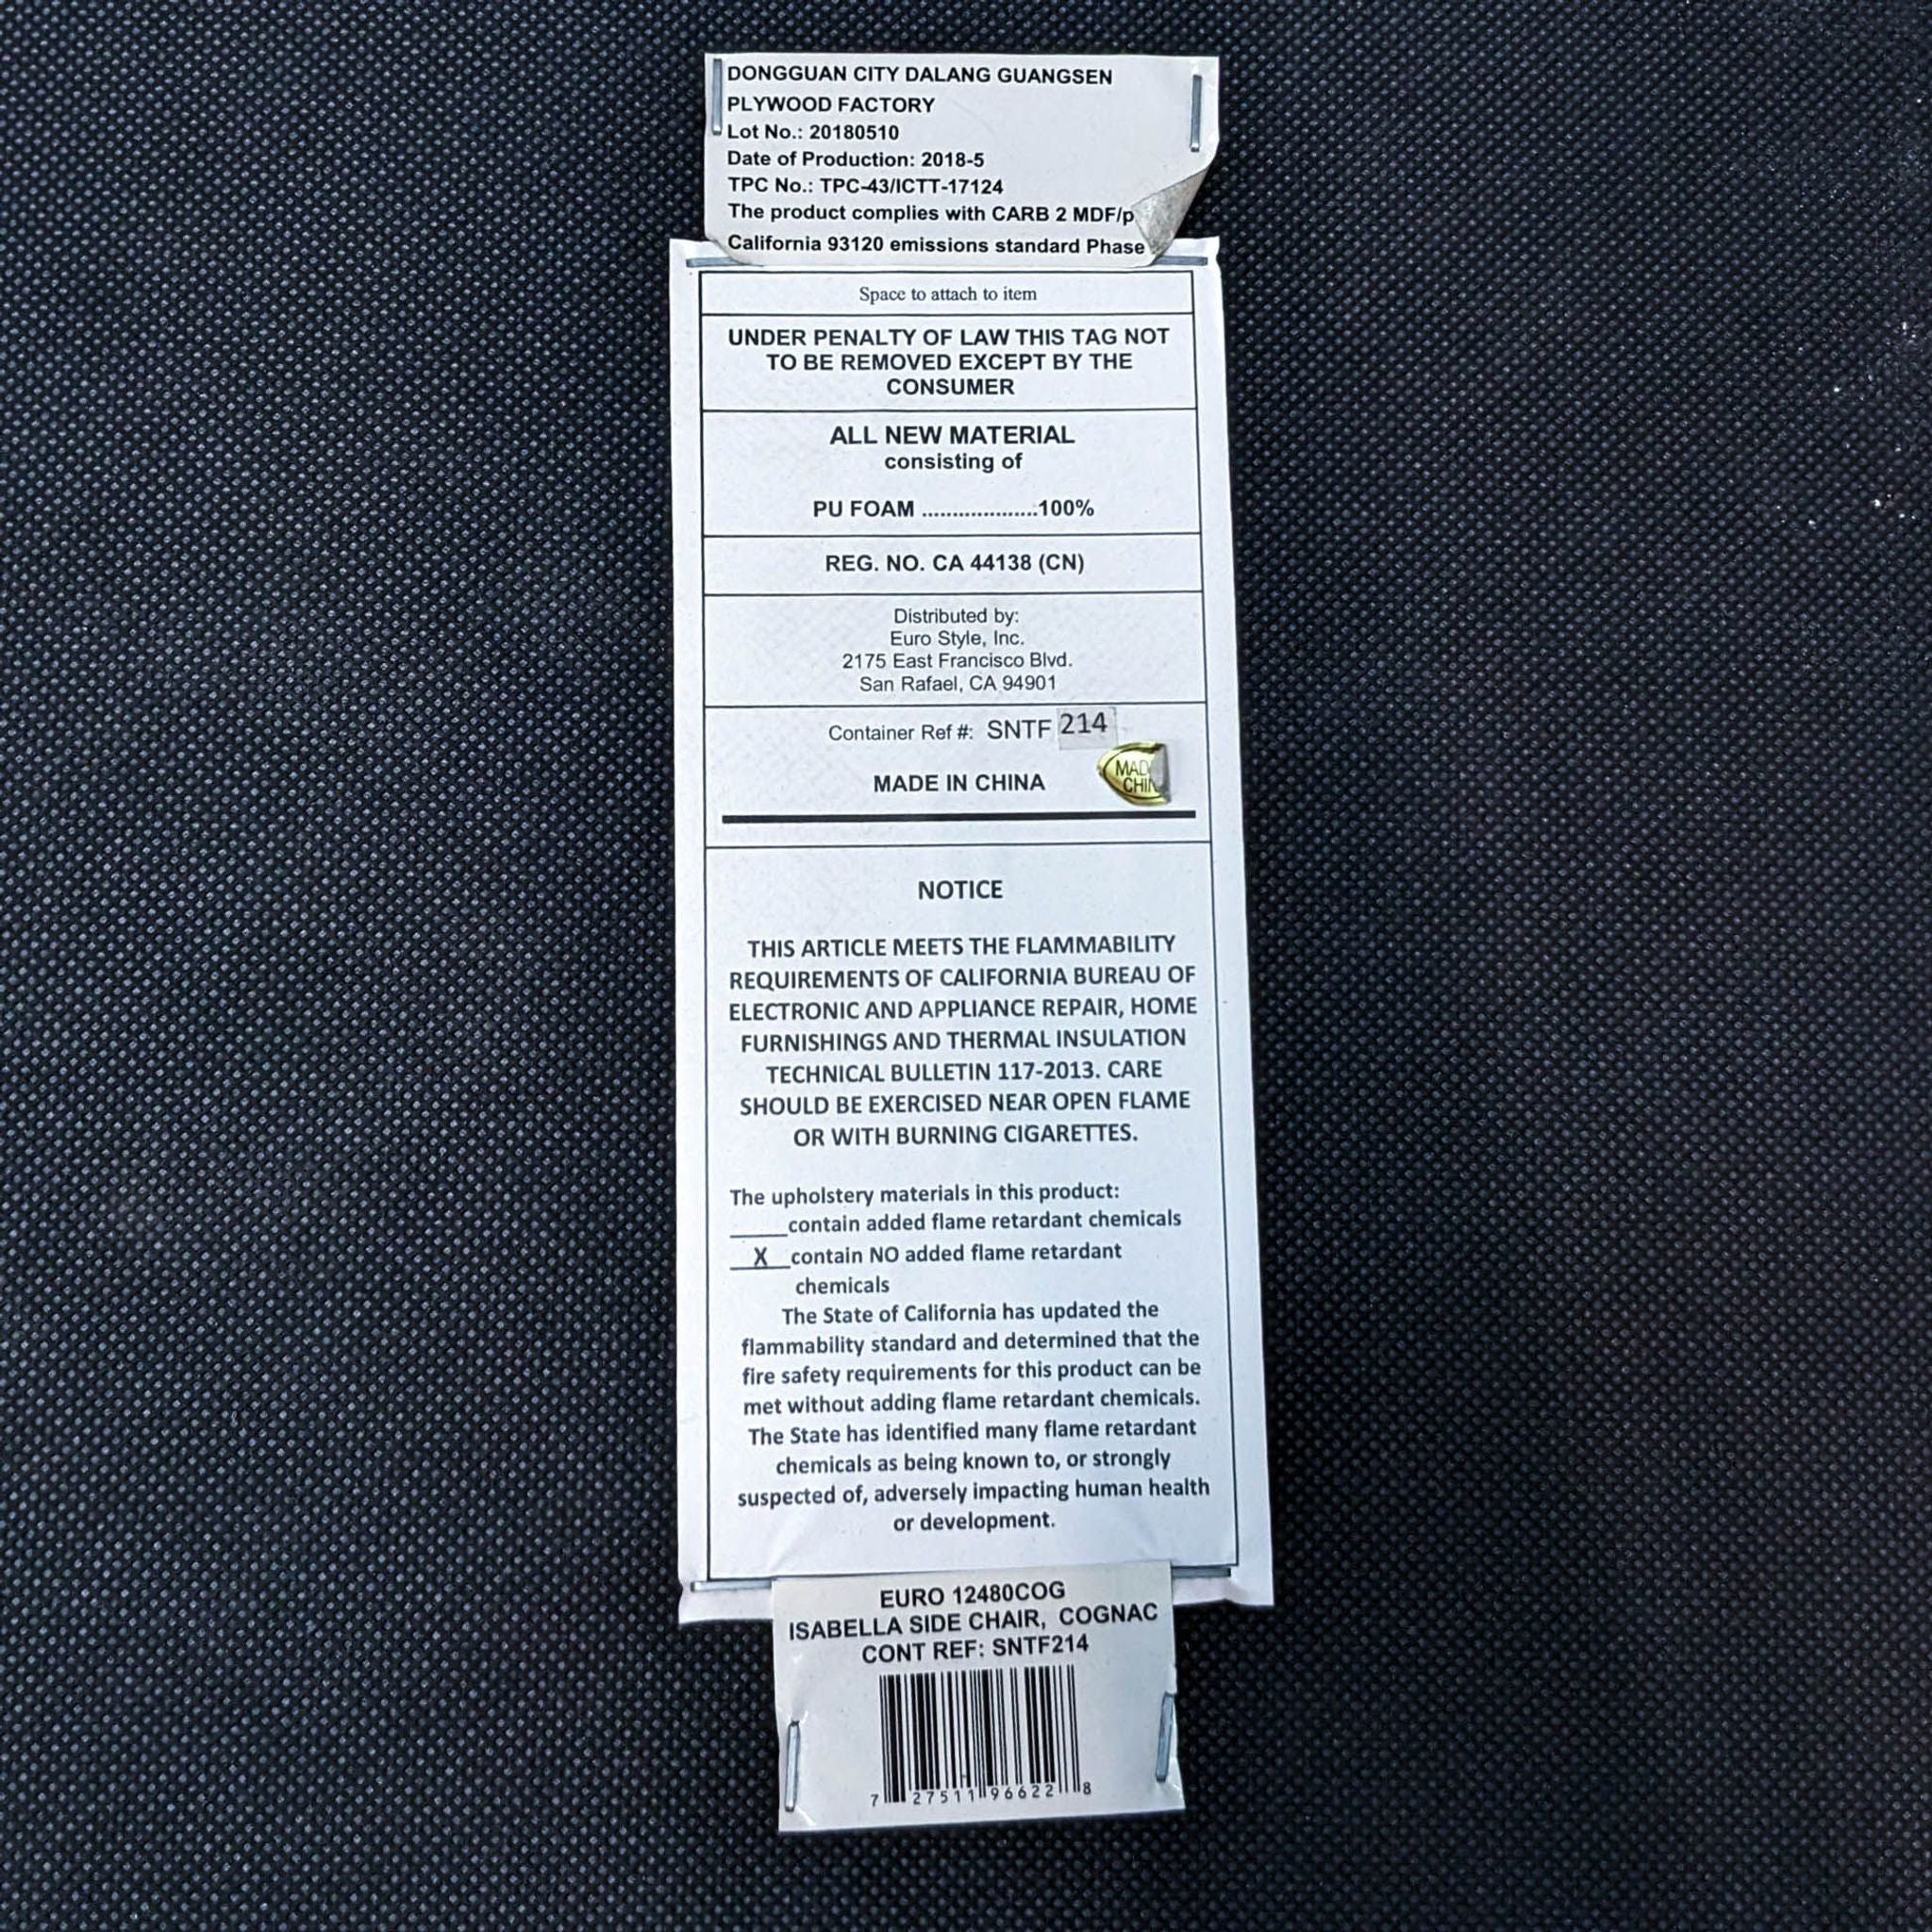 Label attached to a Euro Style Isabella stackable side chair displaying product information and flammability notice.